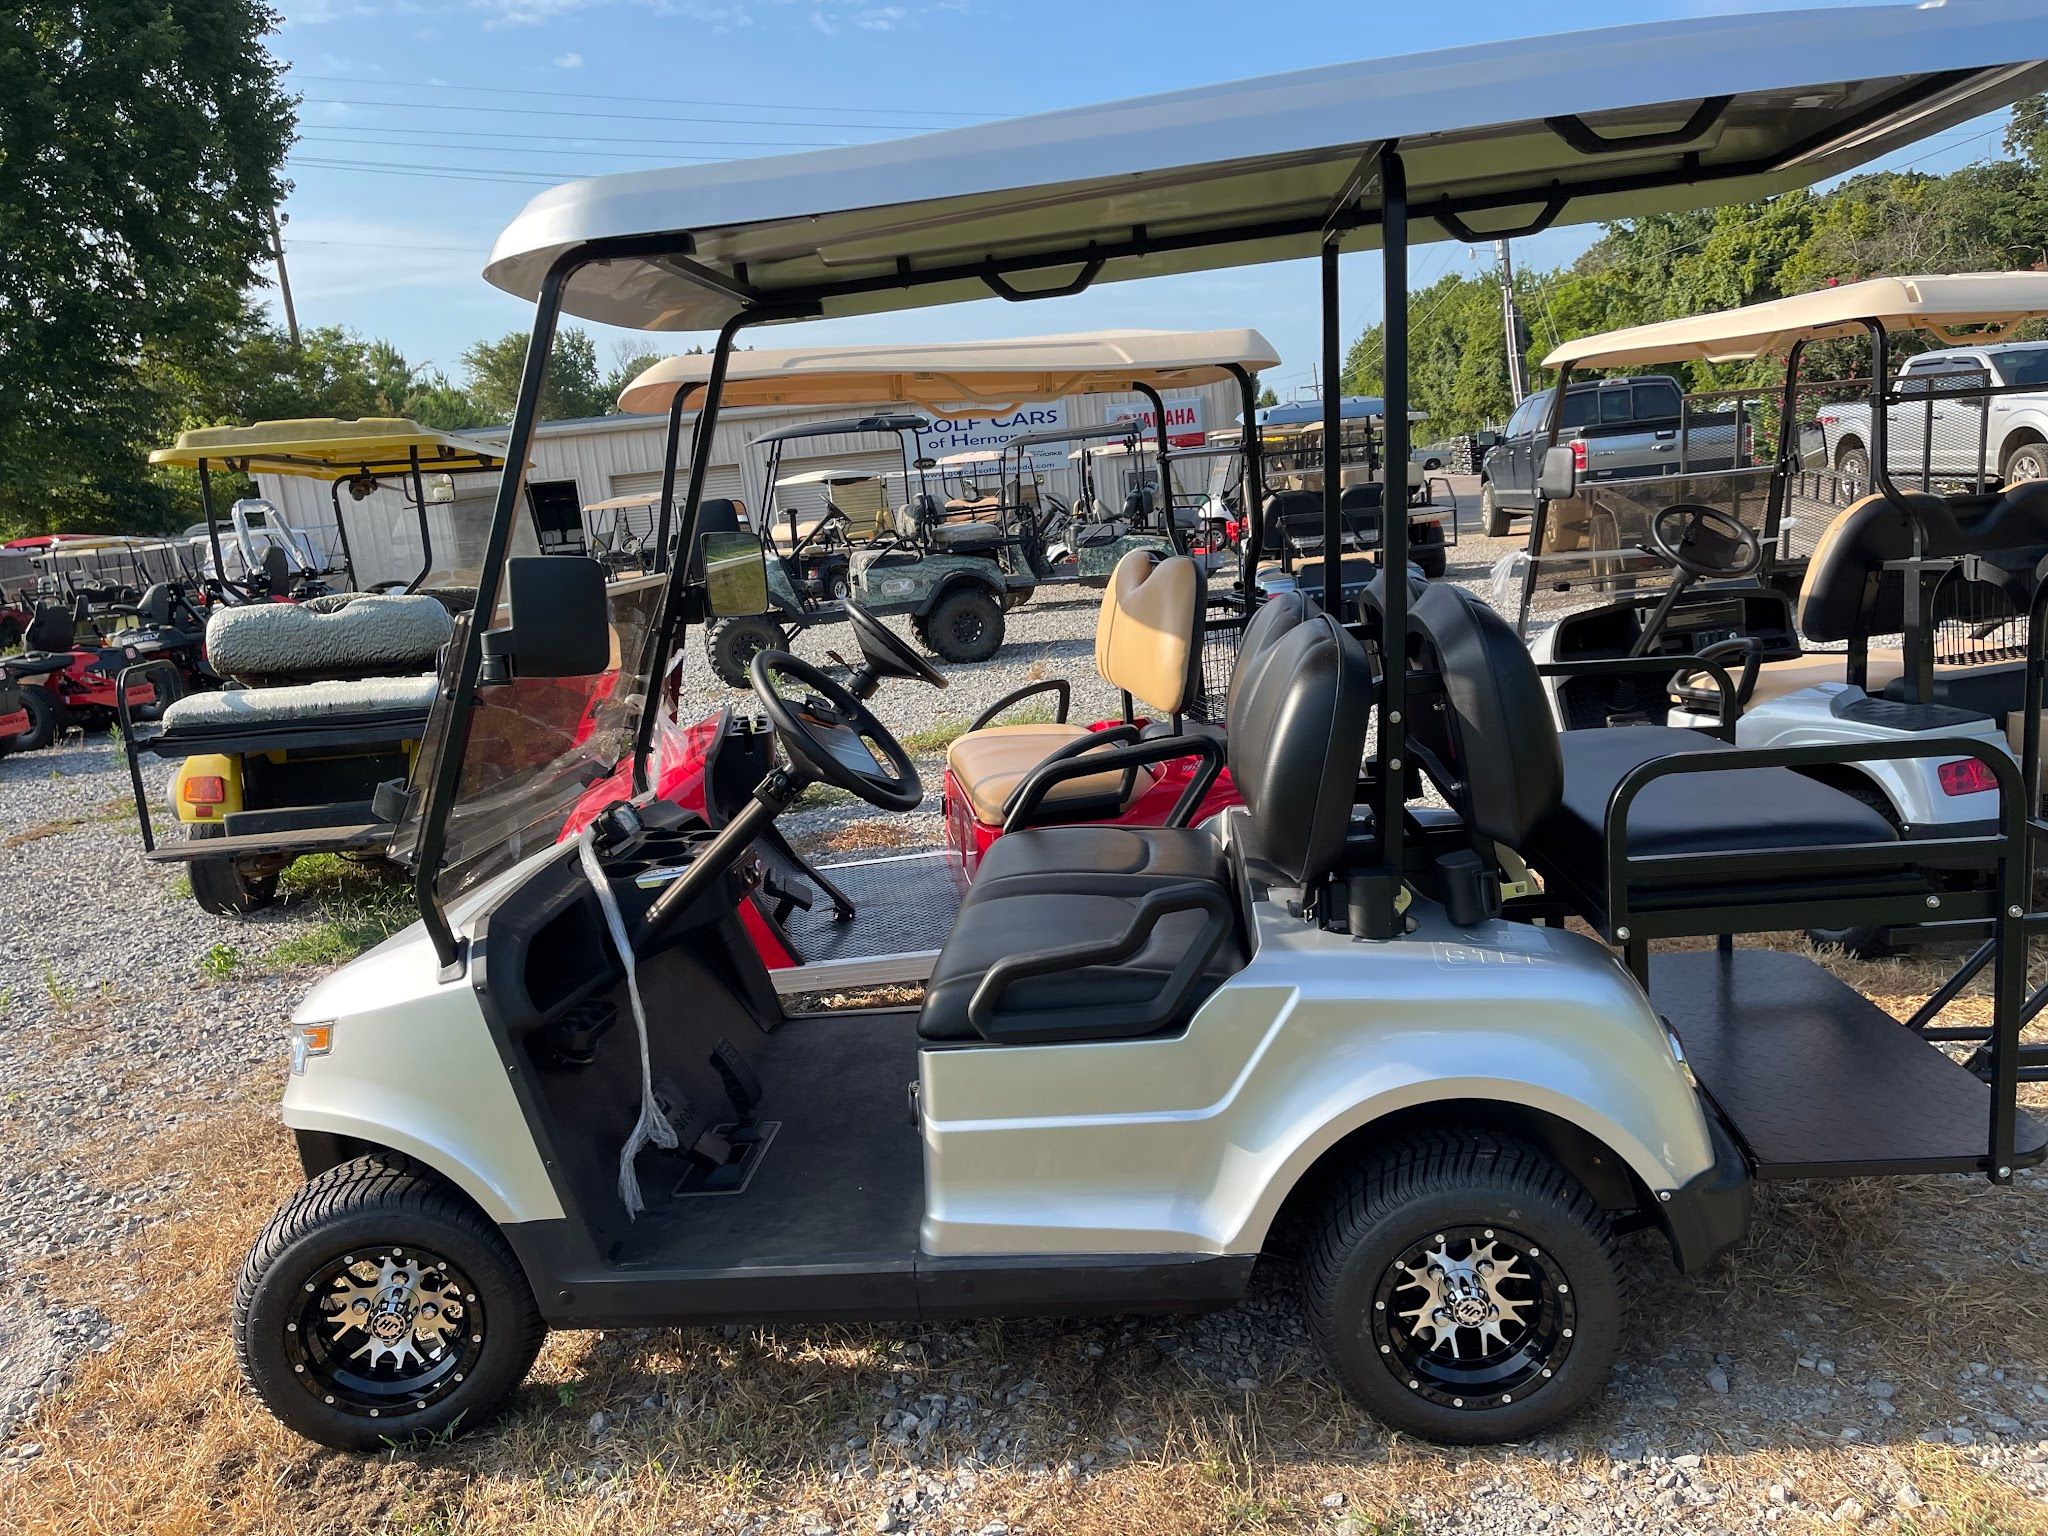 Services & Products Golf Cars of Hernando in Hernando MS